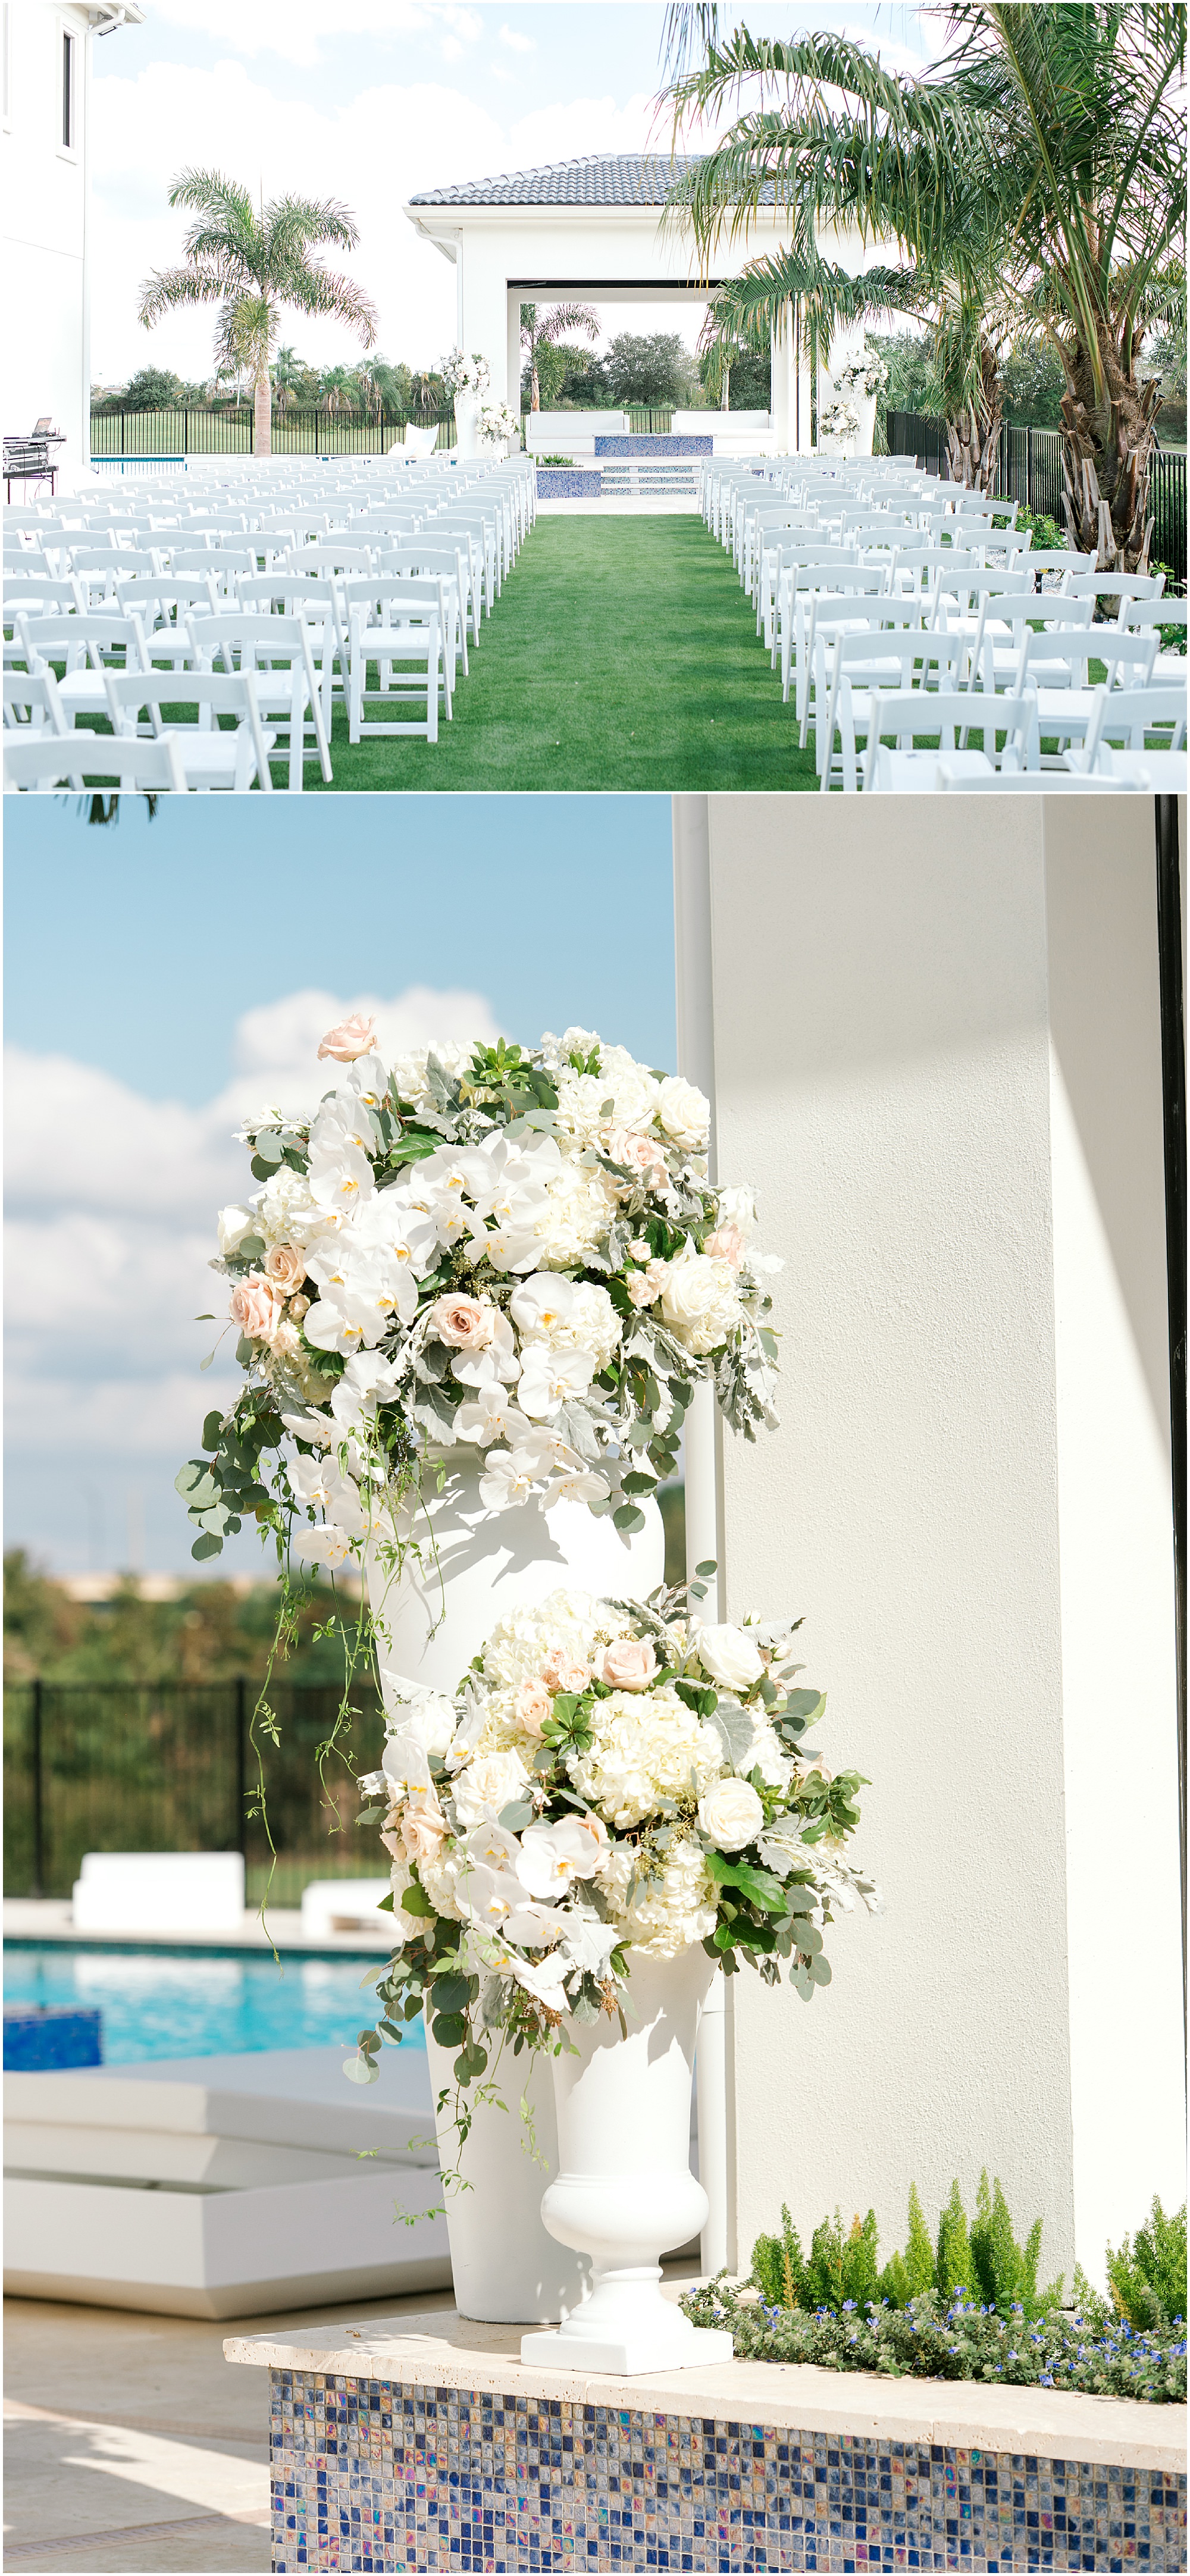 Outdoor wedding ceremony at a private residence. 